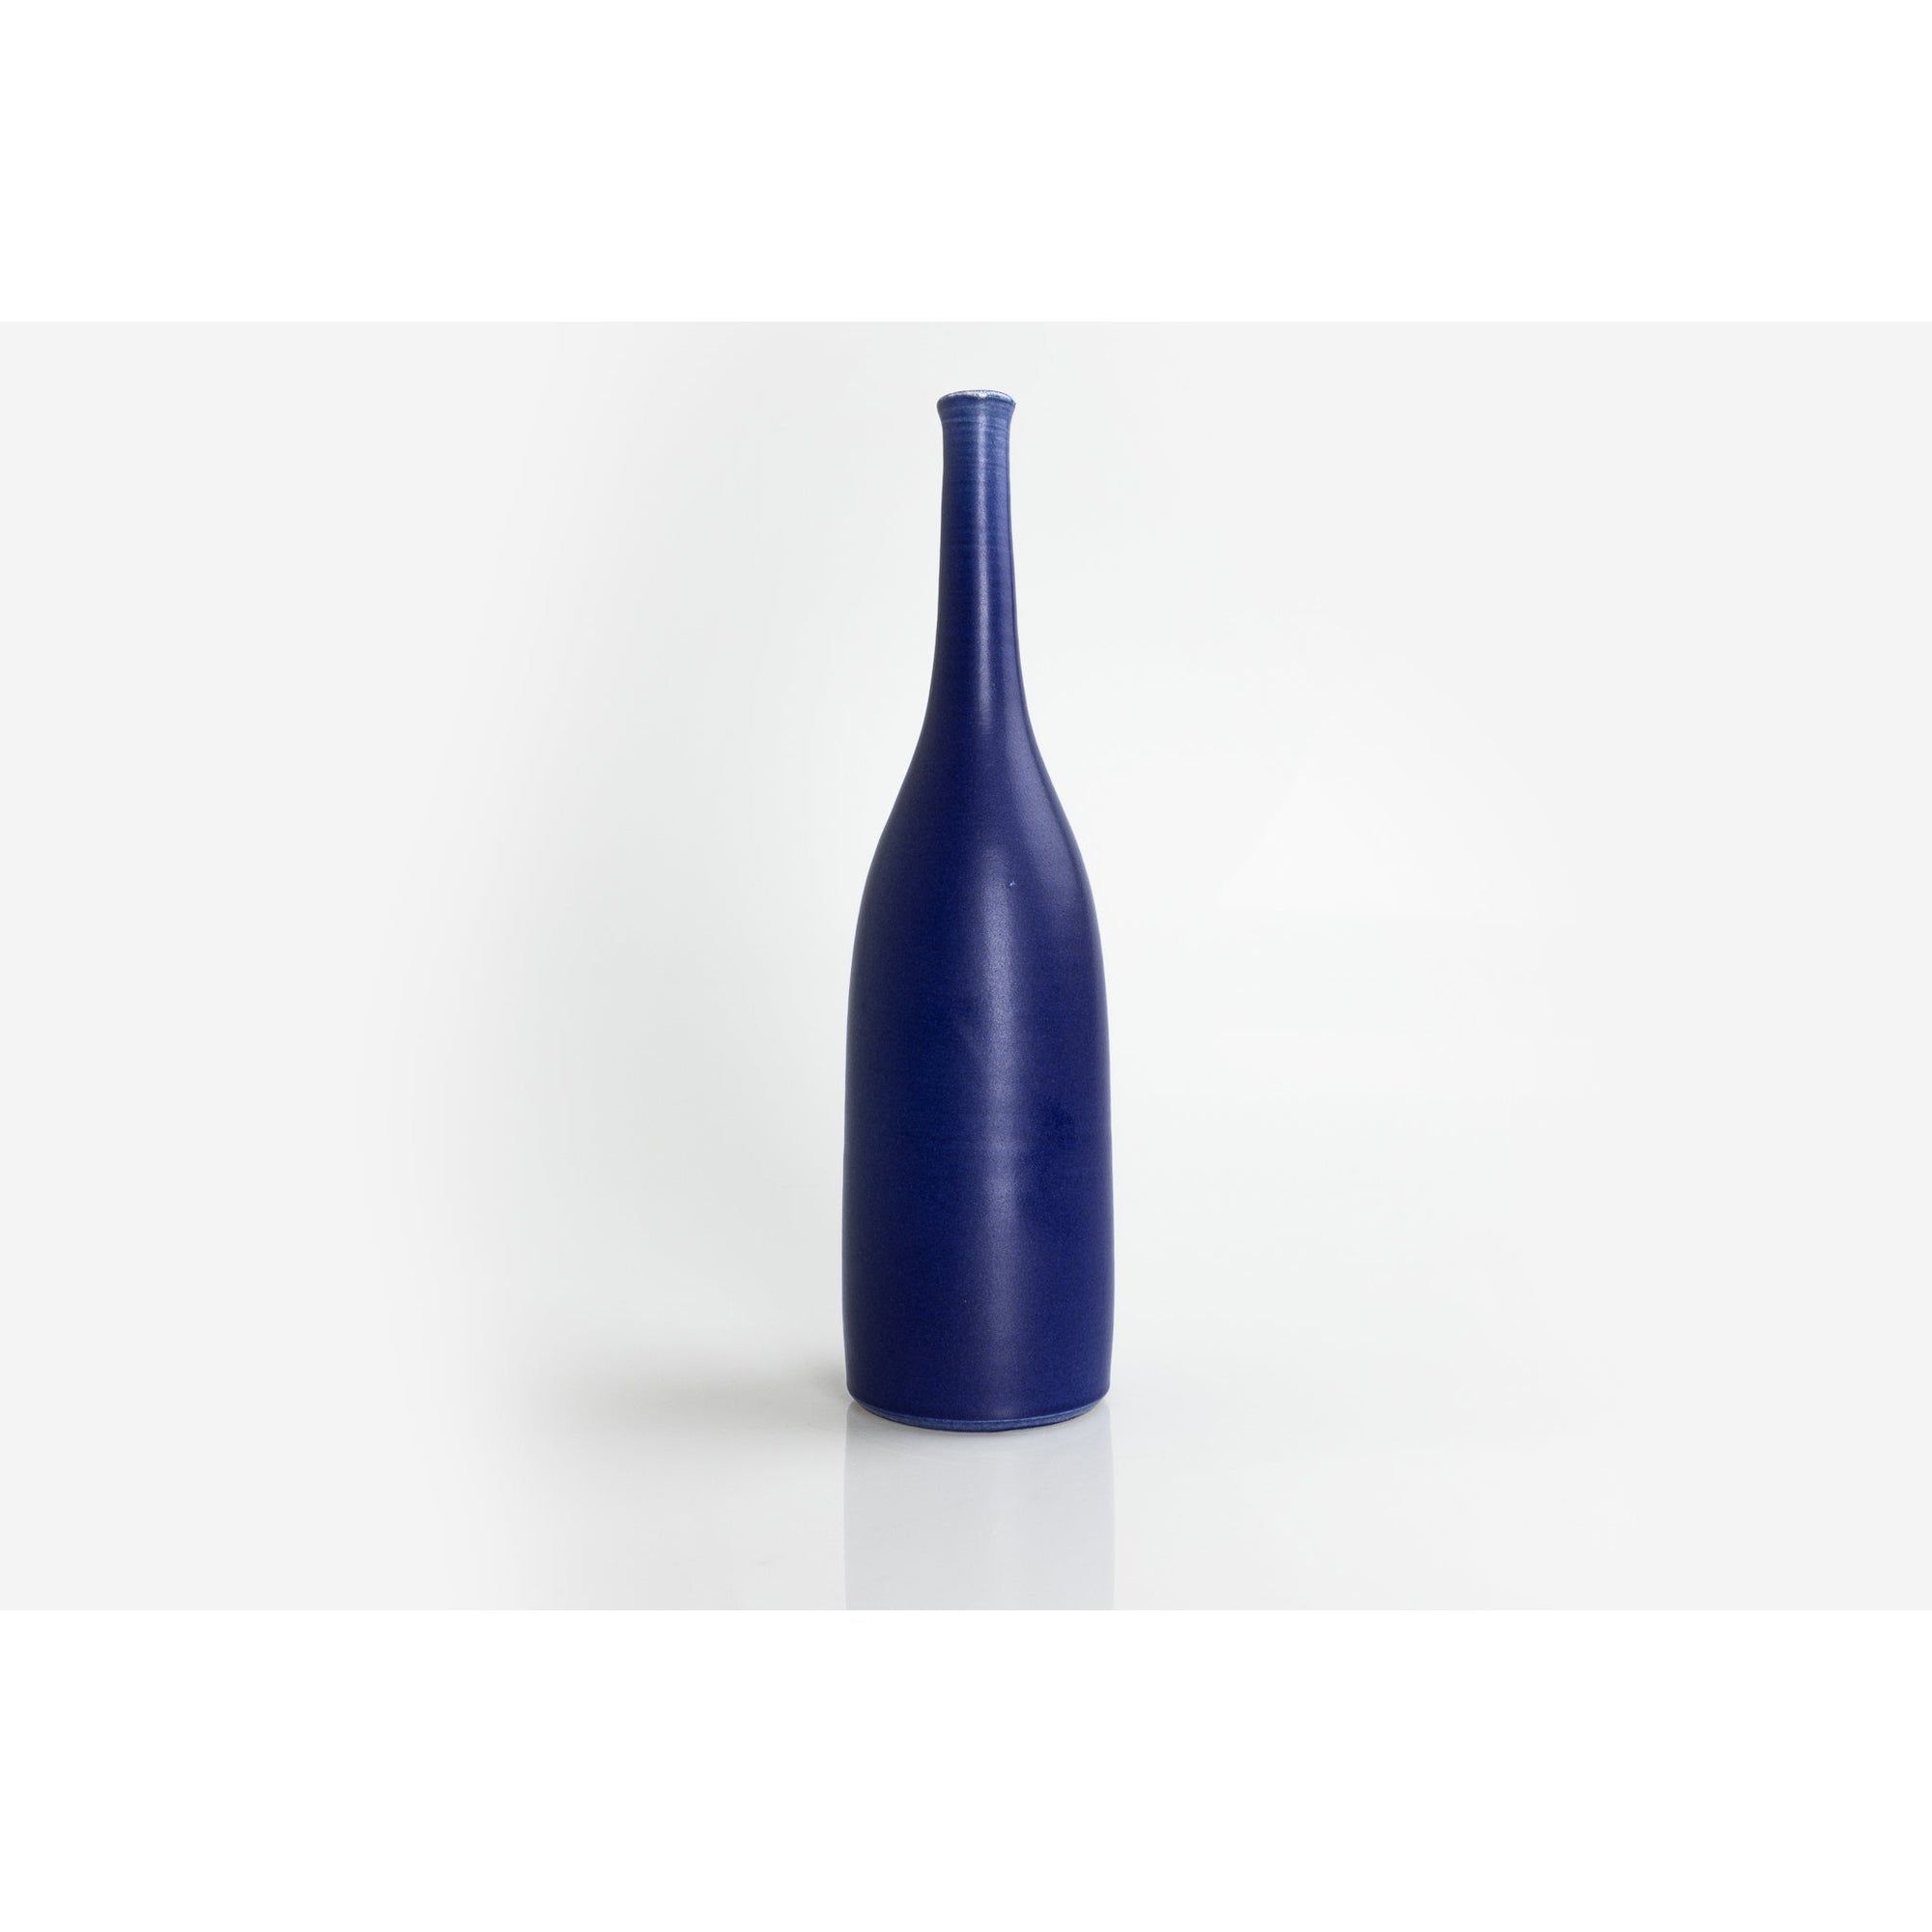 'LB149 Ultramarine Bottle' by Lucy Burley ceramics, available at Padstow Gallery, Cornwall